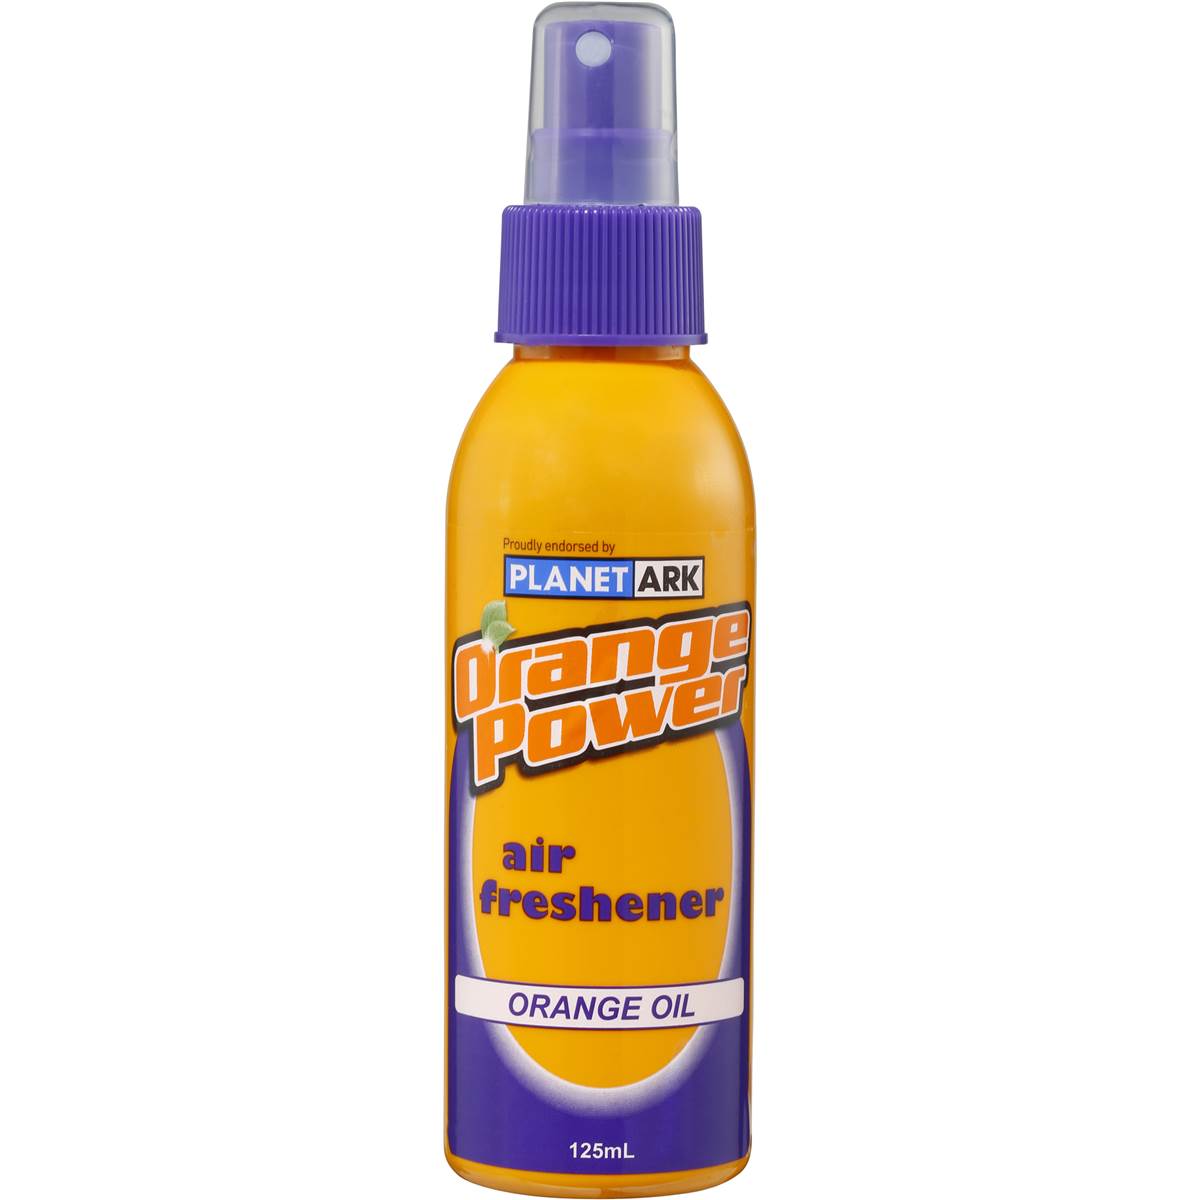 I was at a birthday party, age 7, and there was this orange air freshener that smelled sooo so good, so I sprayed it all over myself, and then I smelled really good, so all the kids started spraying it on themselves. Not 20 minutes later, all of us are crying and screaming because our skin is burning and turning red. There was something very irritating in the air freshener.